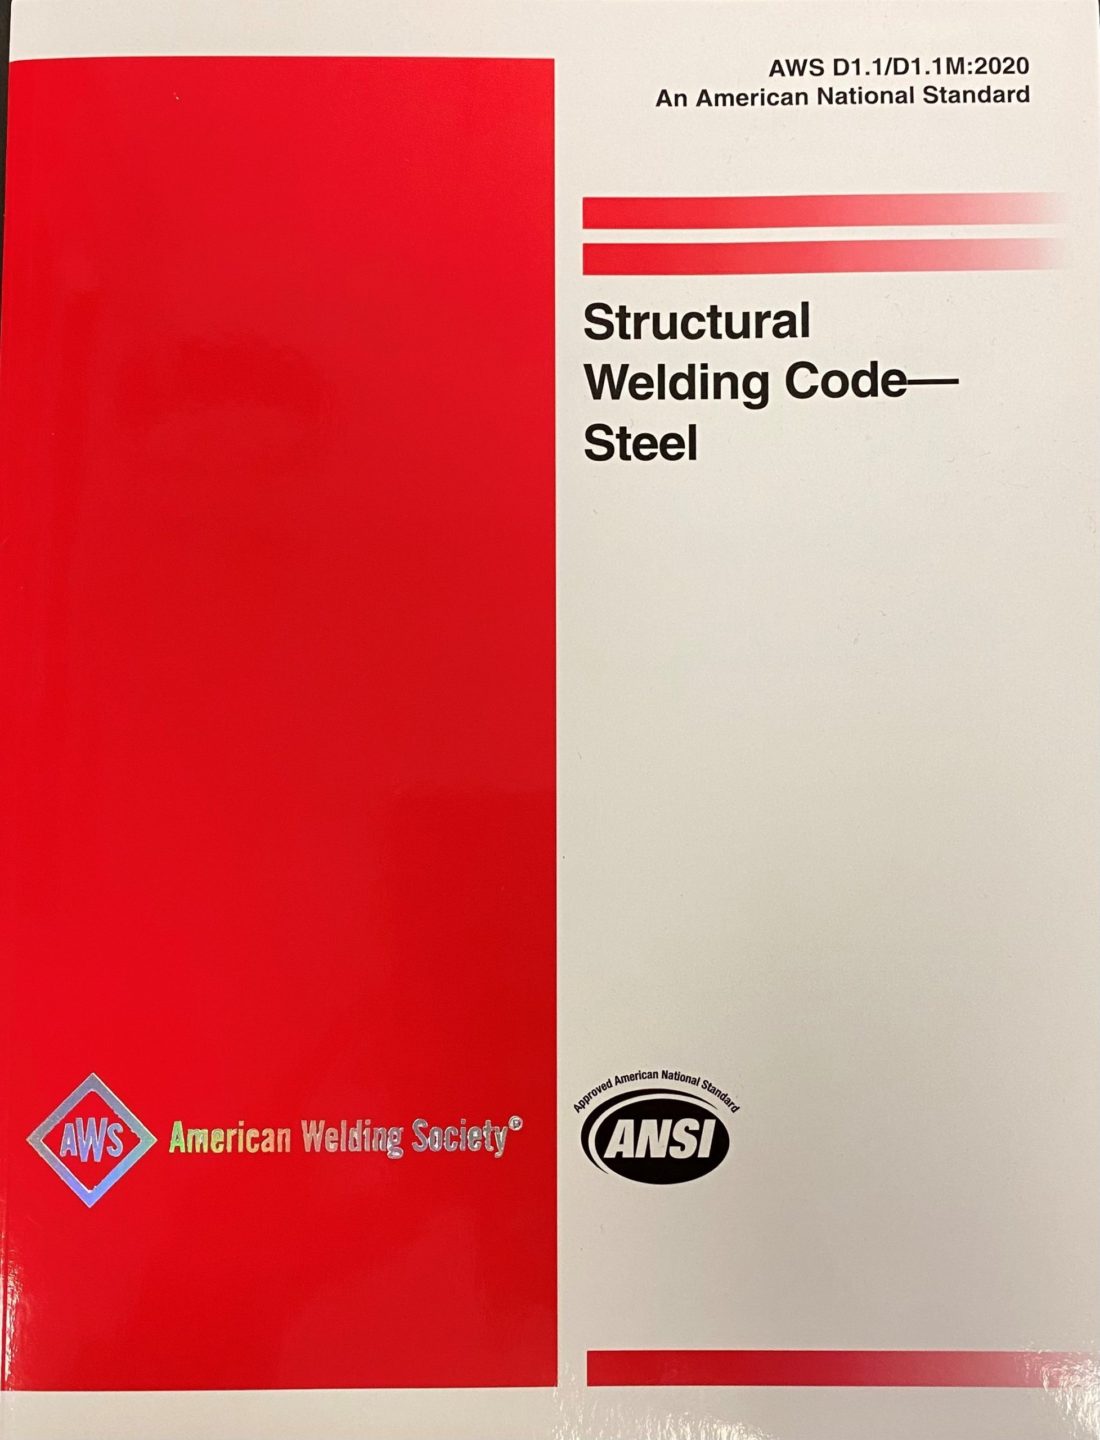 Welding Codes & Specifications